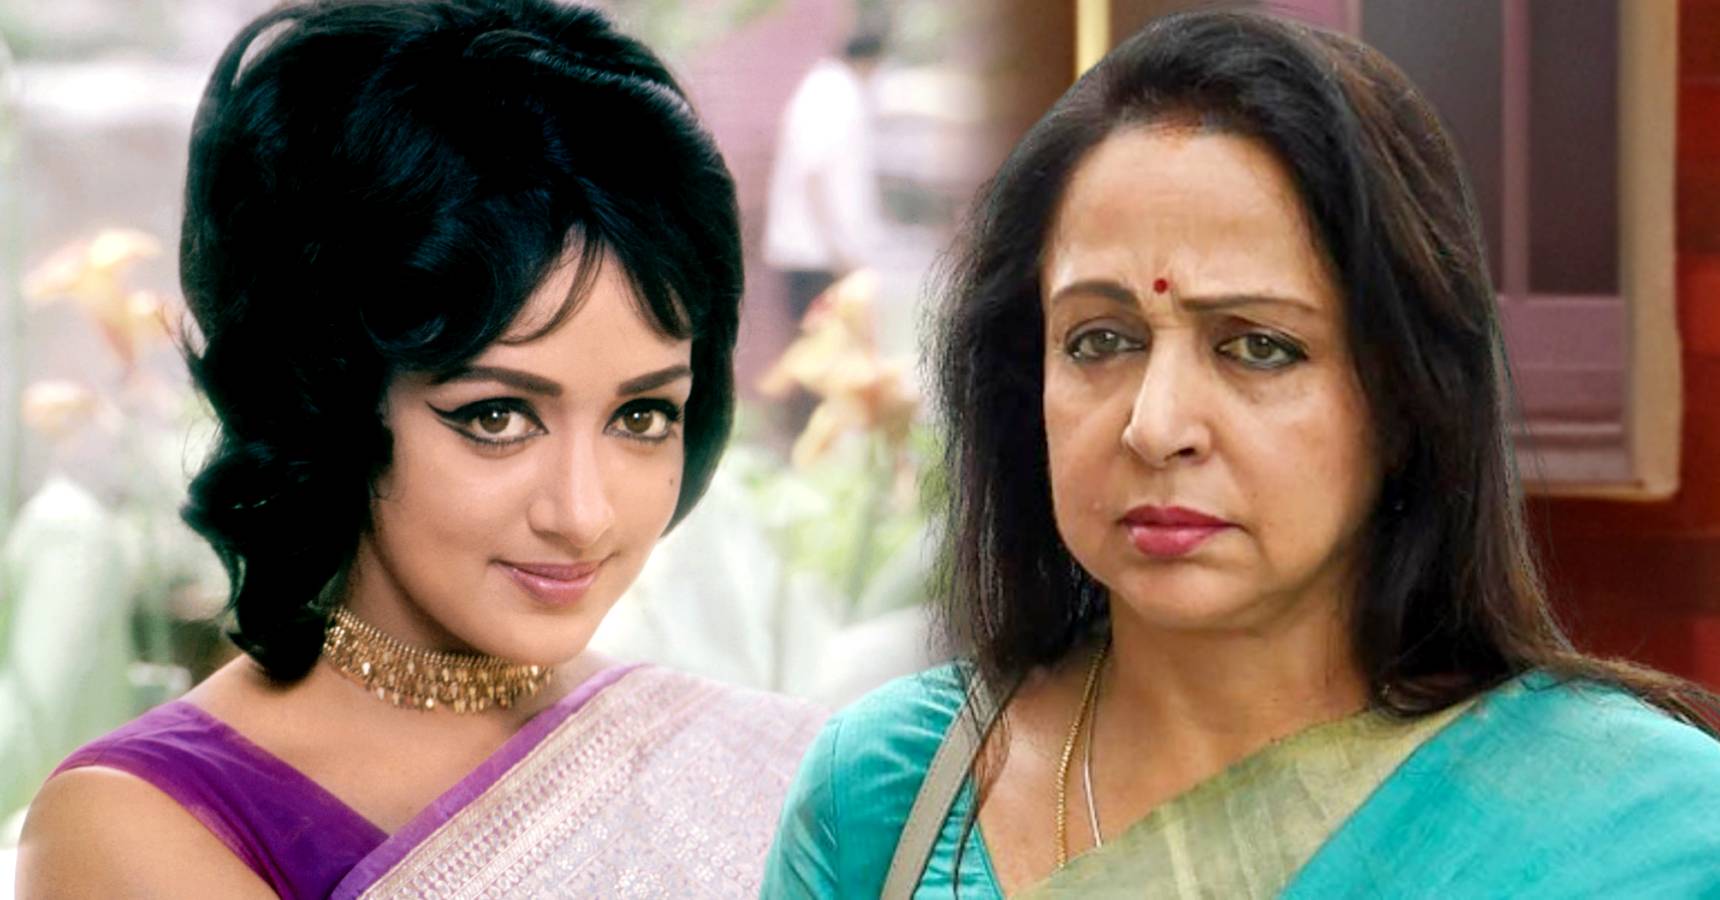 Bollywood actress Hema Malini reveals disgraceful demand of a director wanting to remove pin from her saree